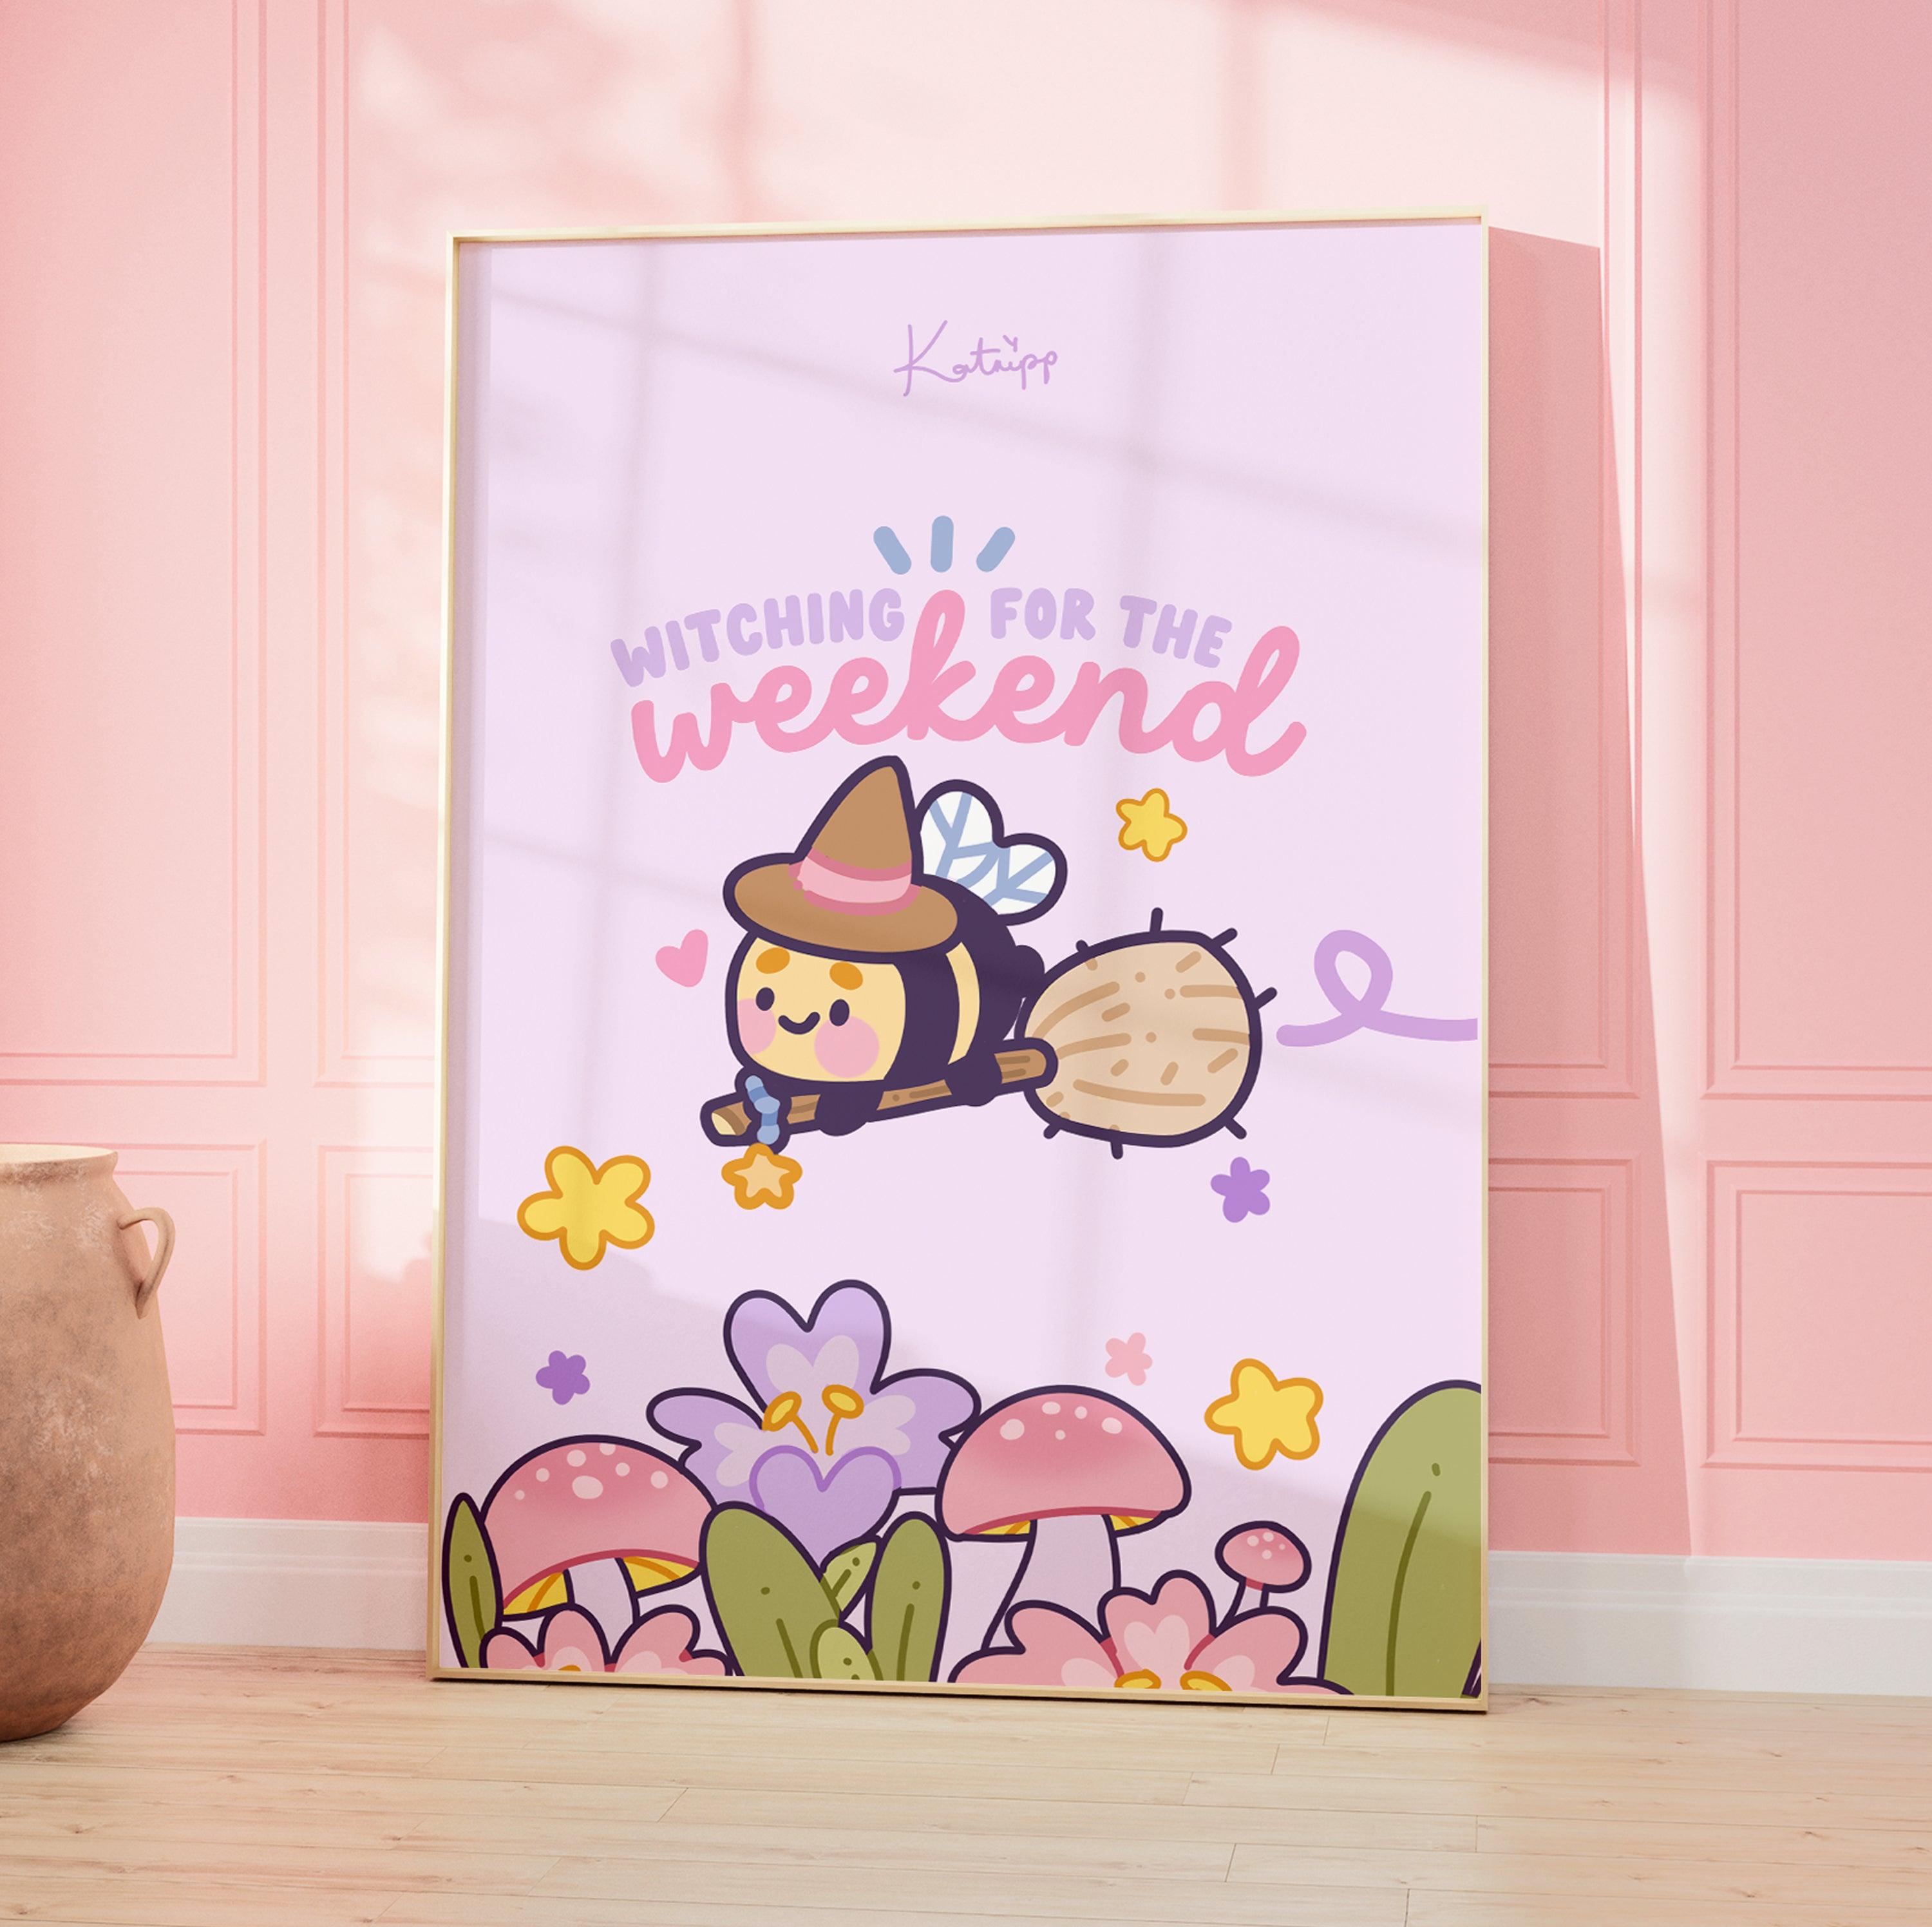 Witchin' for the Weekend! Kawaii Bumblebutt x The Pastel Witch Art Print - Katnipp Studios